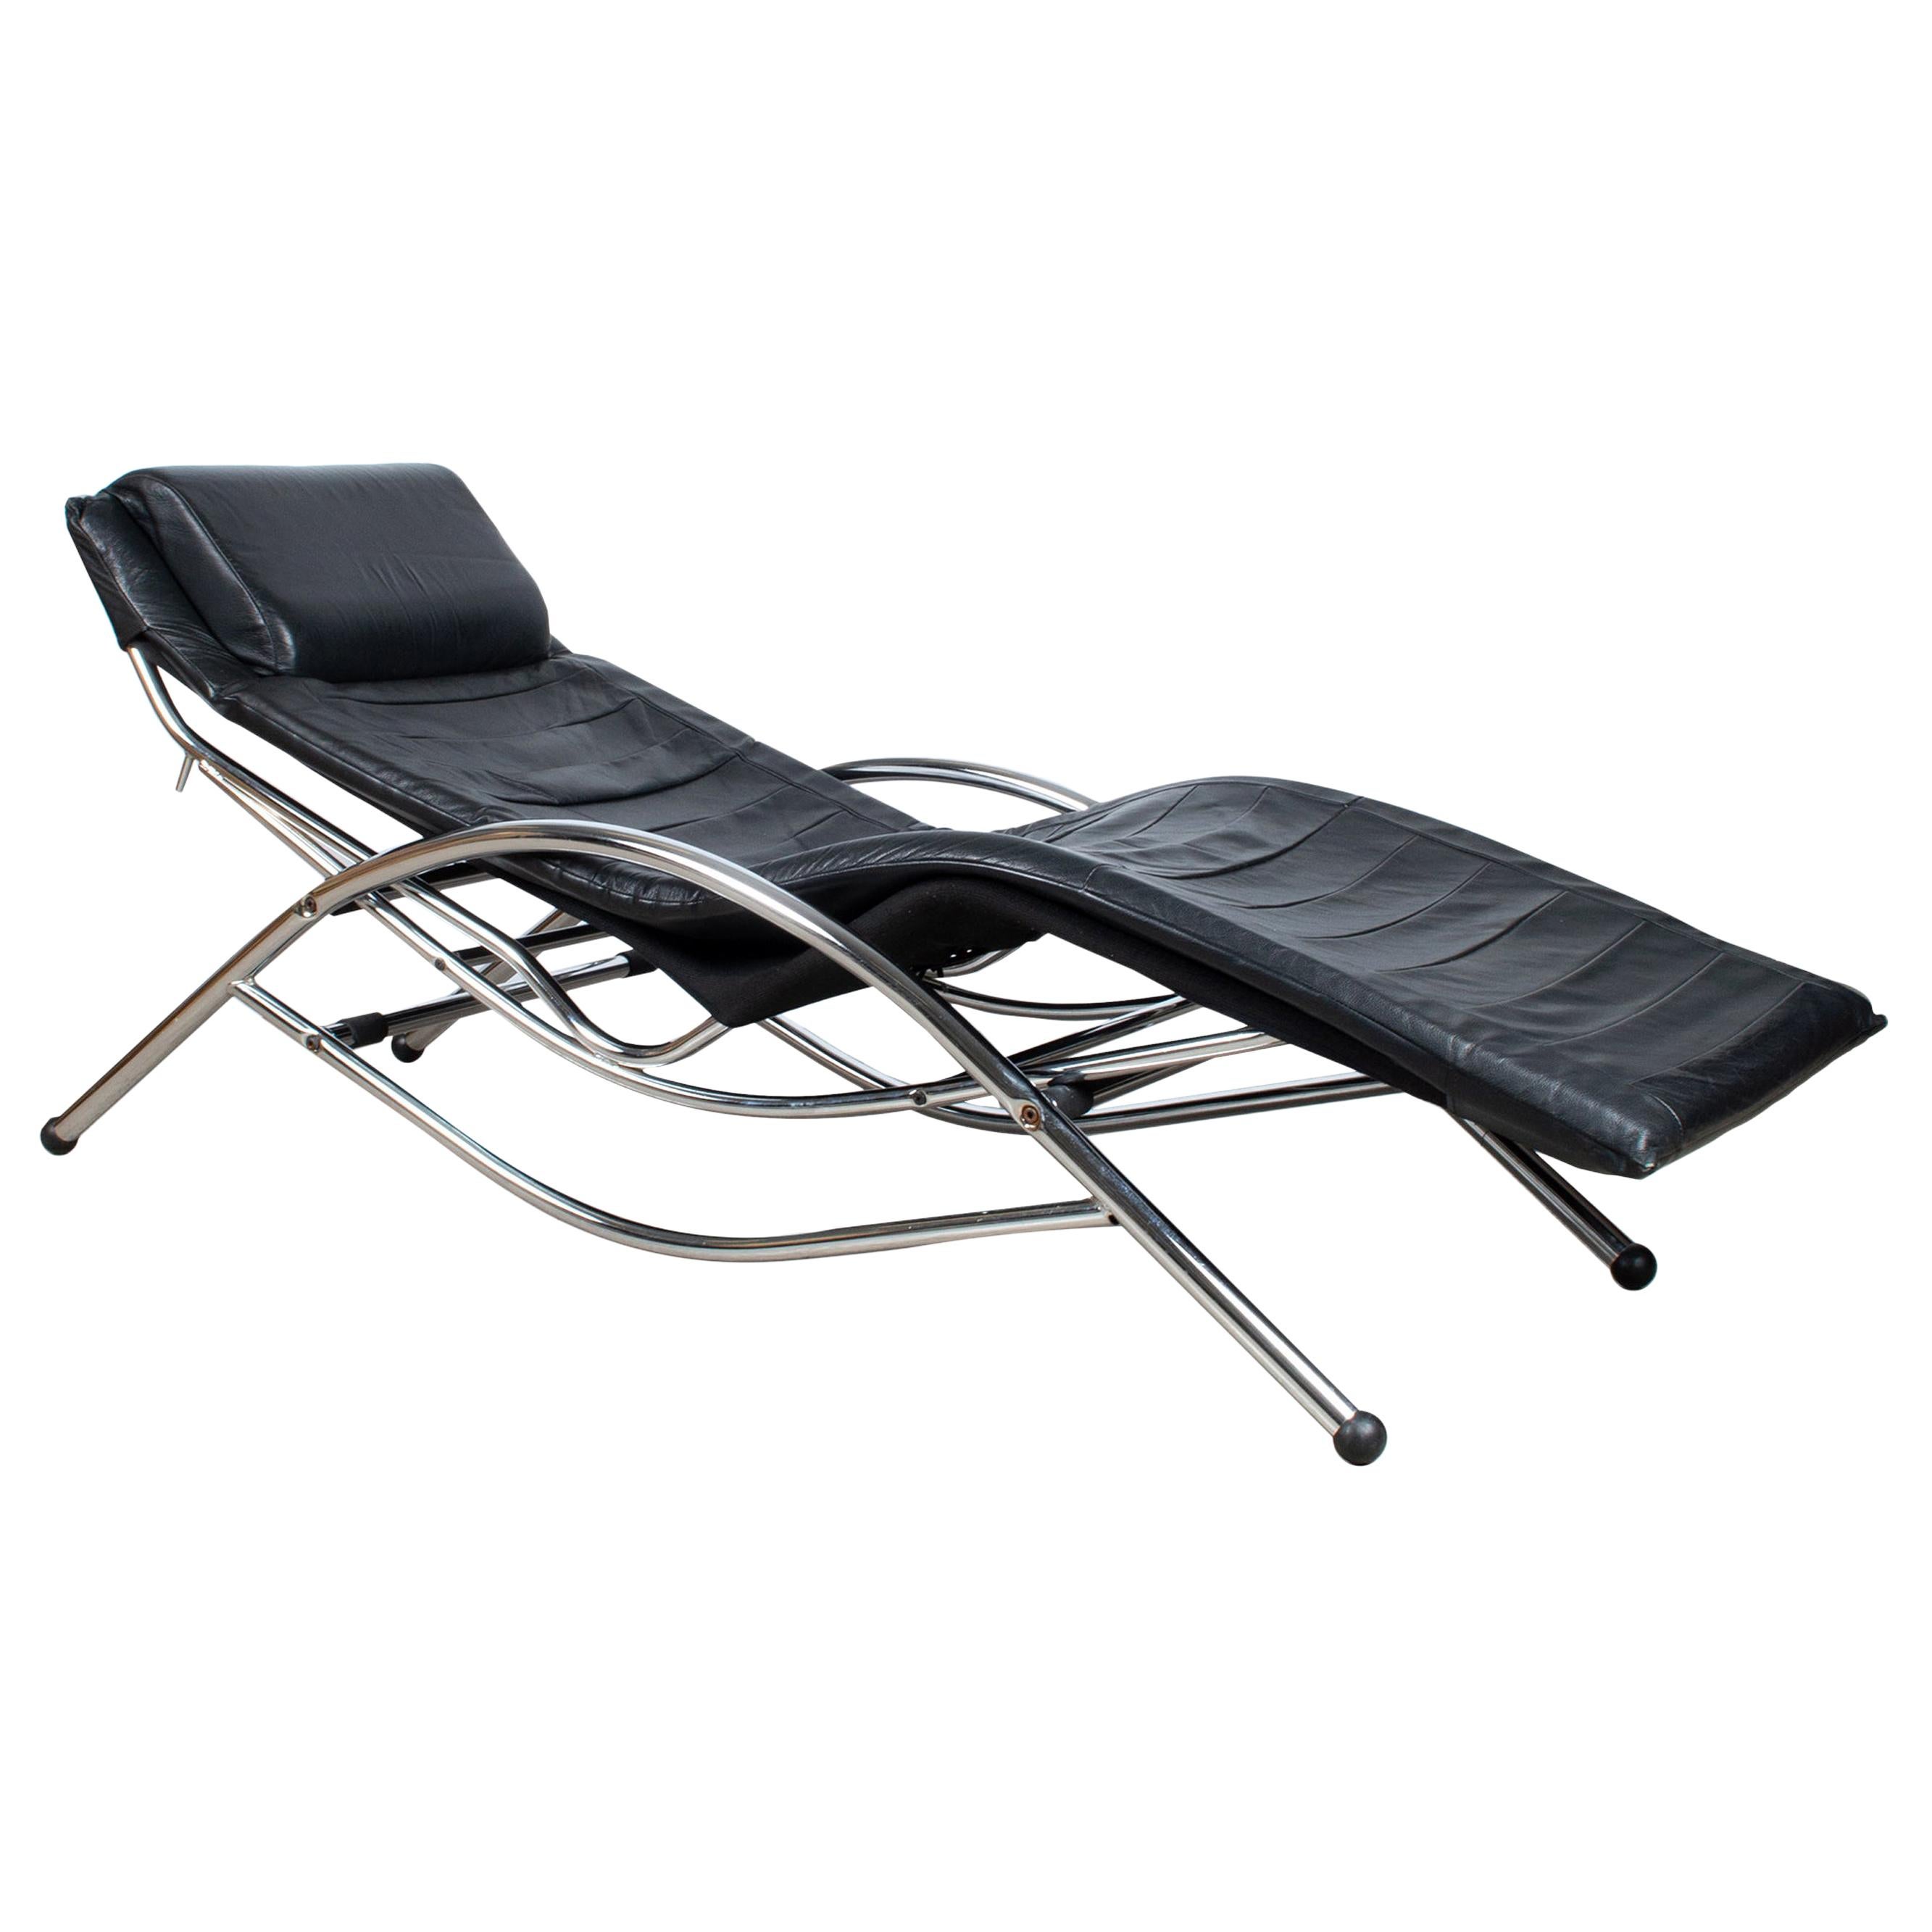 Mid-Century Modern Leather and Chrome Chaise Longue Daybed, Belgium, circa 1980 For Sale